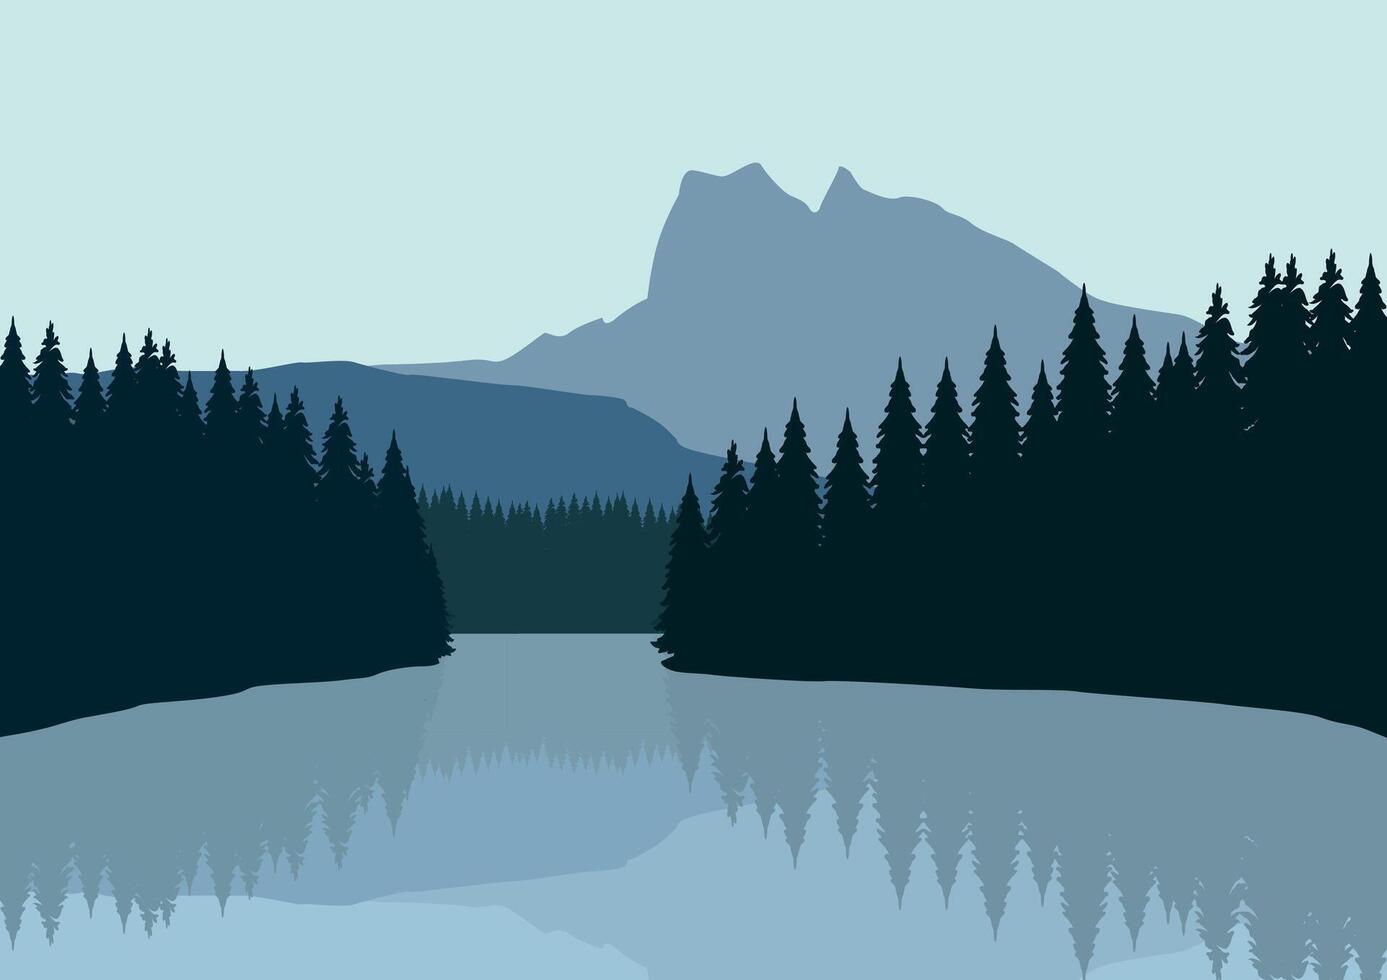 Lake and mountains landscape. Illustration in a flat style. vector